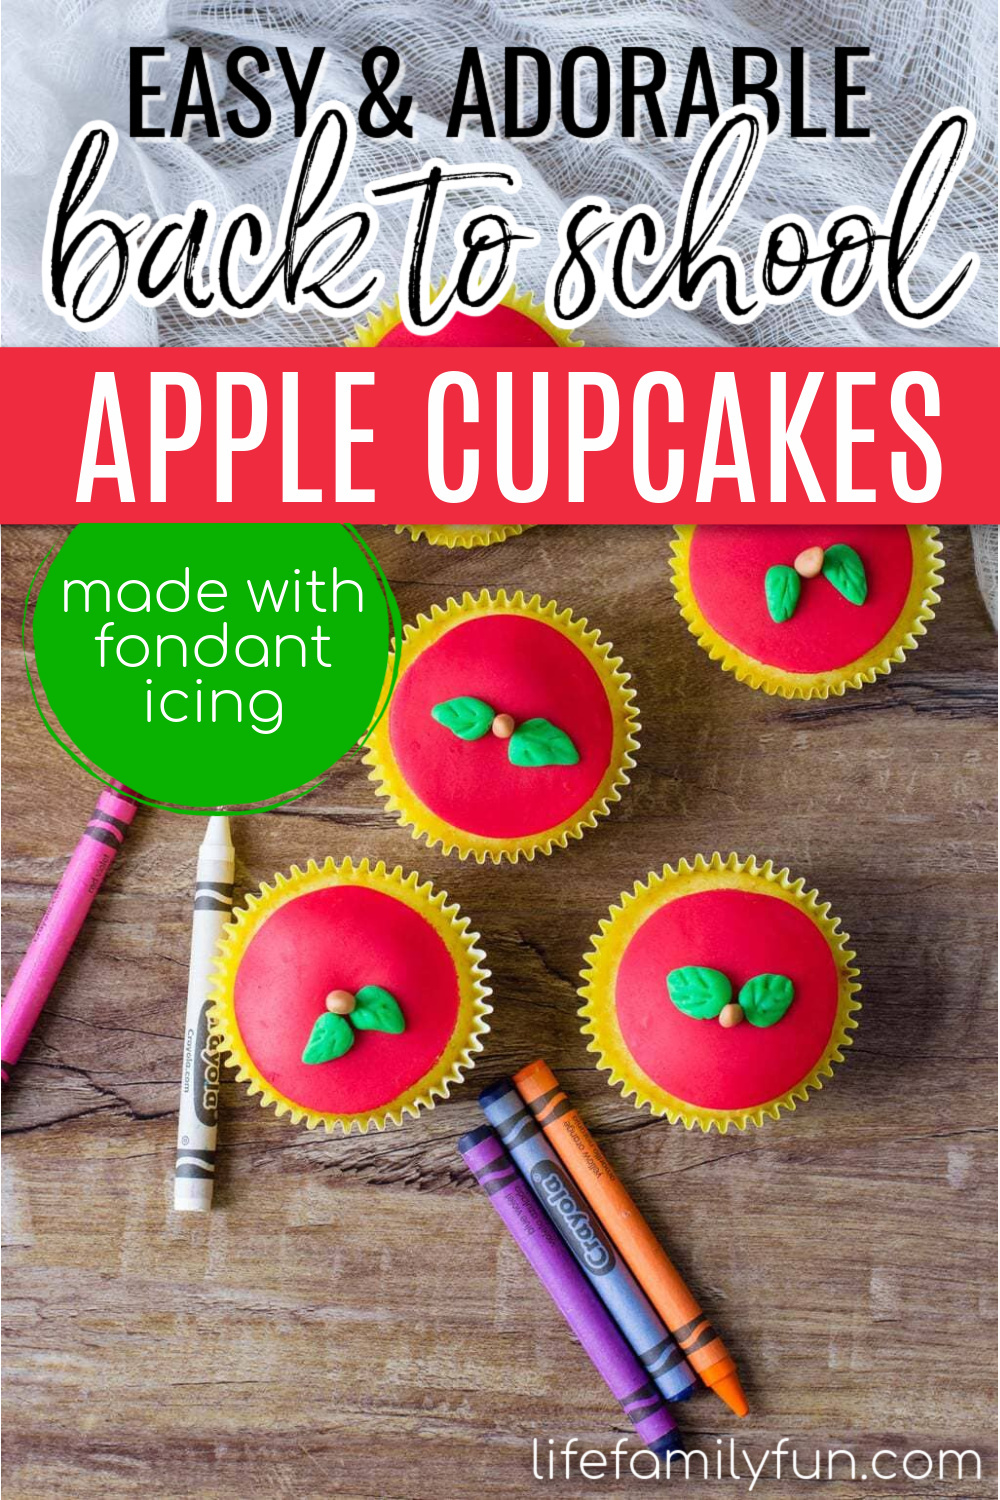 apple cupcakes for back to school